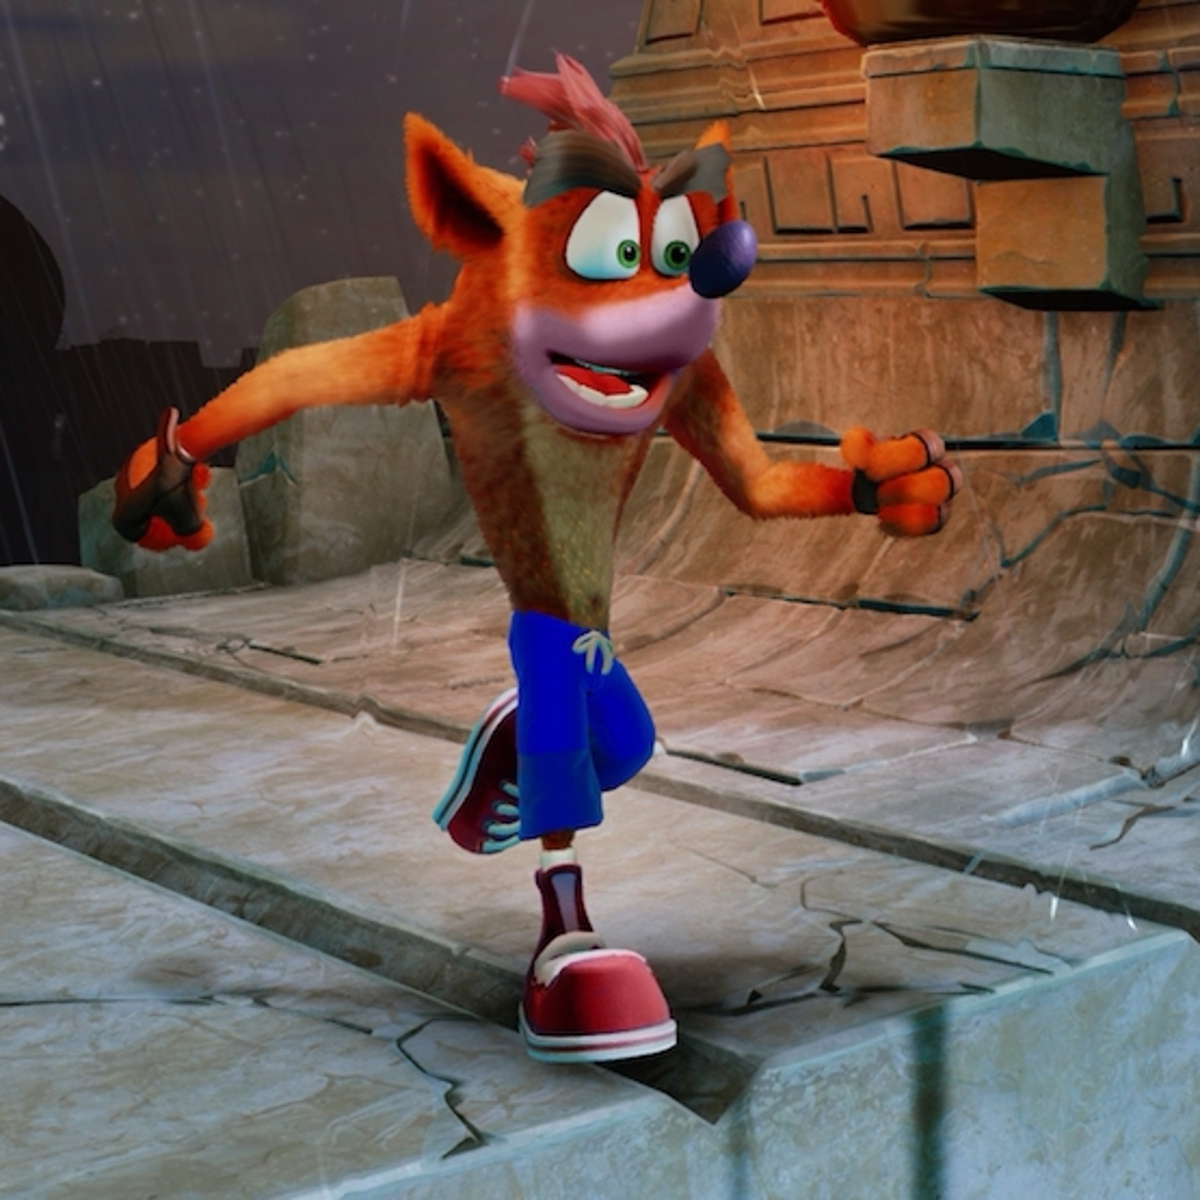 Arena Desillusie versneller Crash Bandicoot N Sane Trilogy guide: Tips, differences, how to unlock Coco  and why there are no cheats on PS4, Xbox, PC and Switch | Eurogamer.net